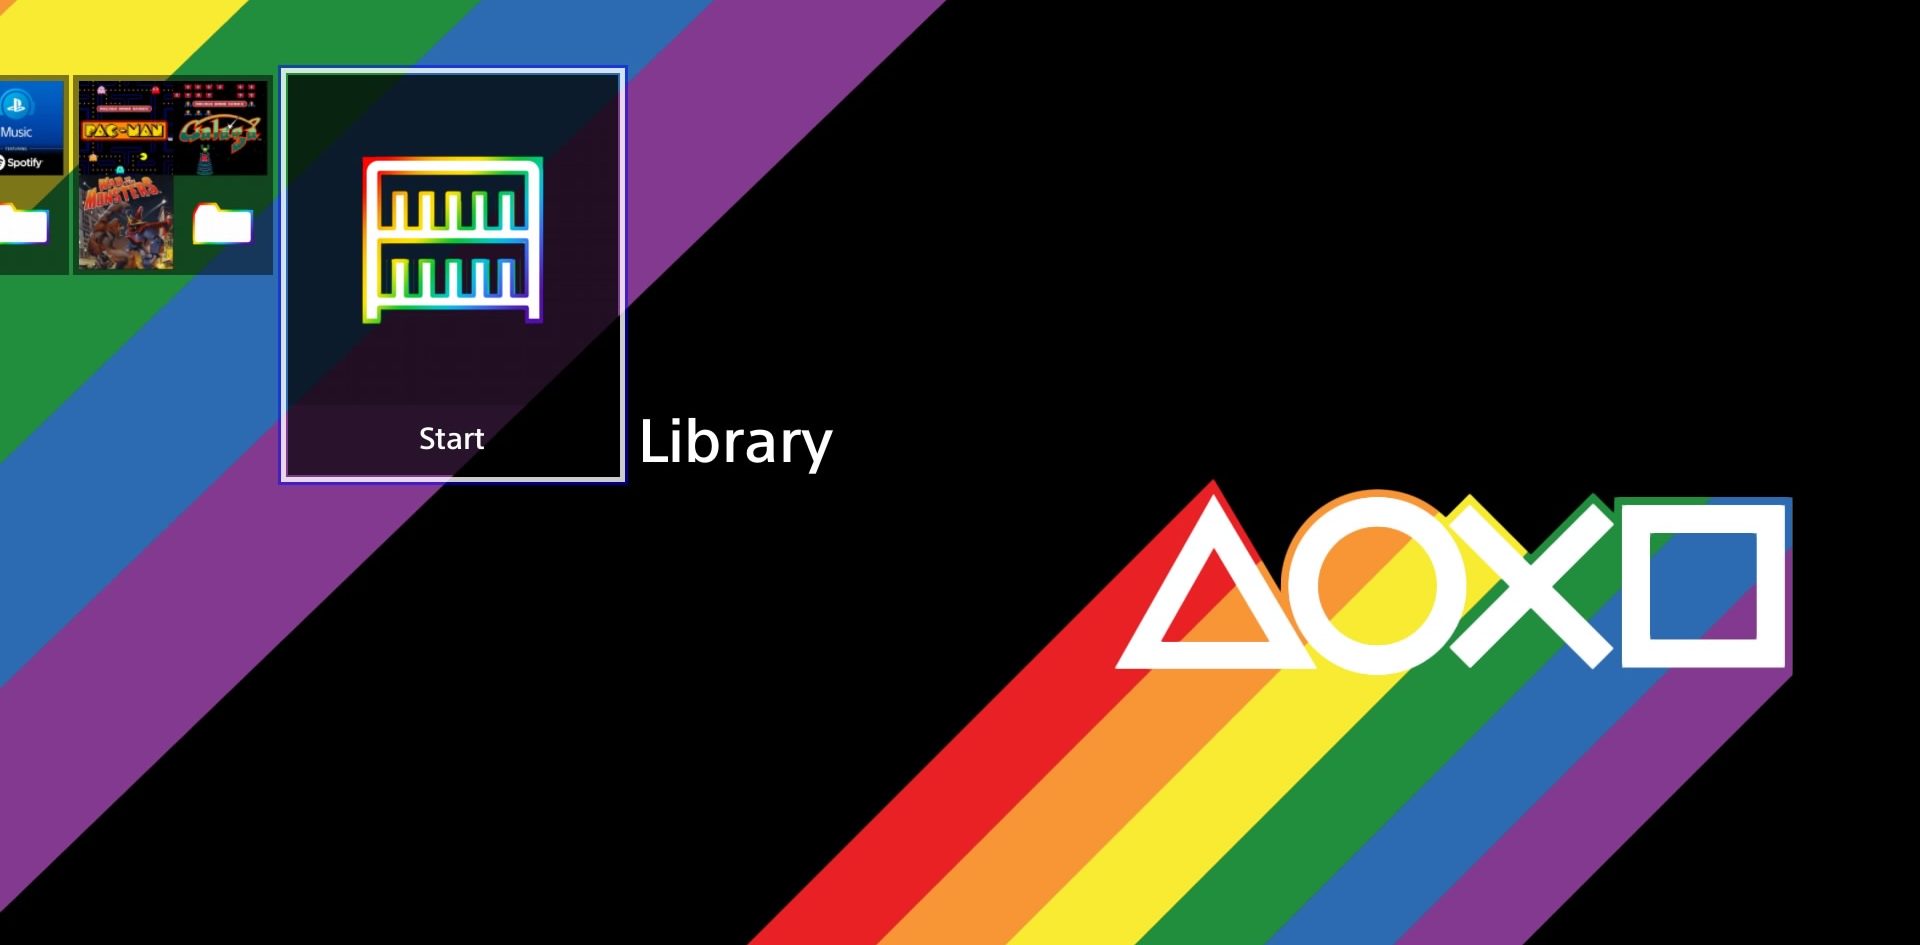 Grab This Free Pride Theme For Your PlayStation 4